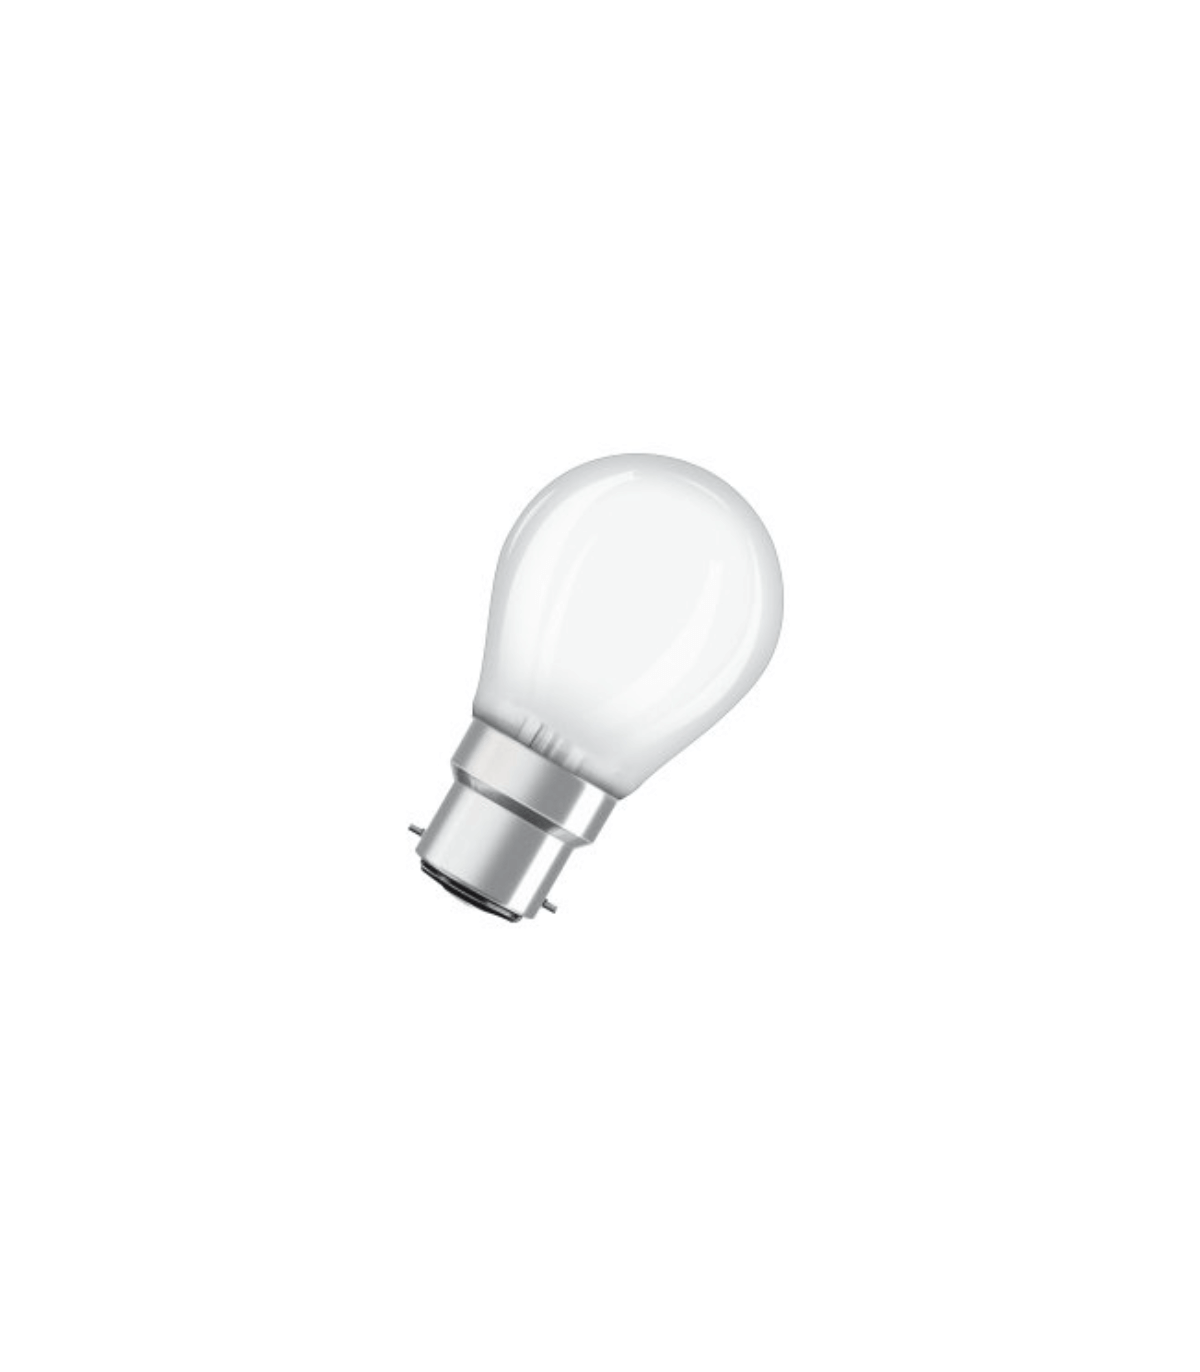 Ampoule LED A60 ultra efficace 4W - 60W Philips